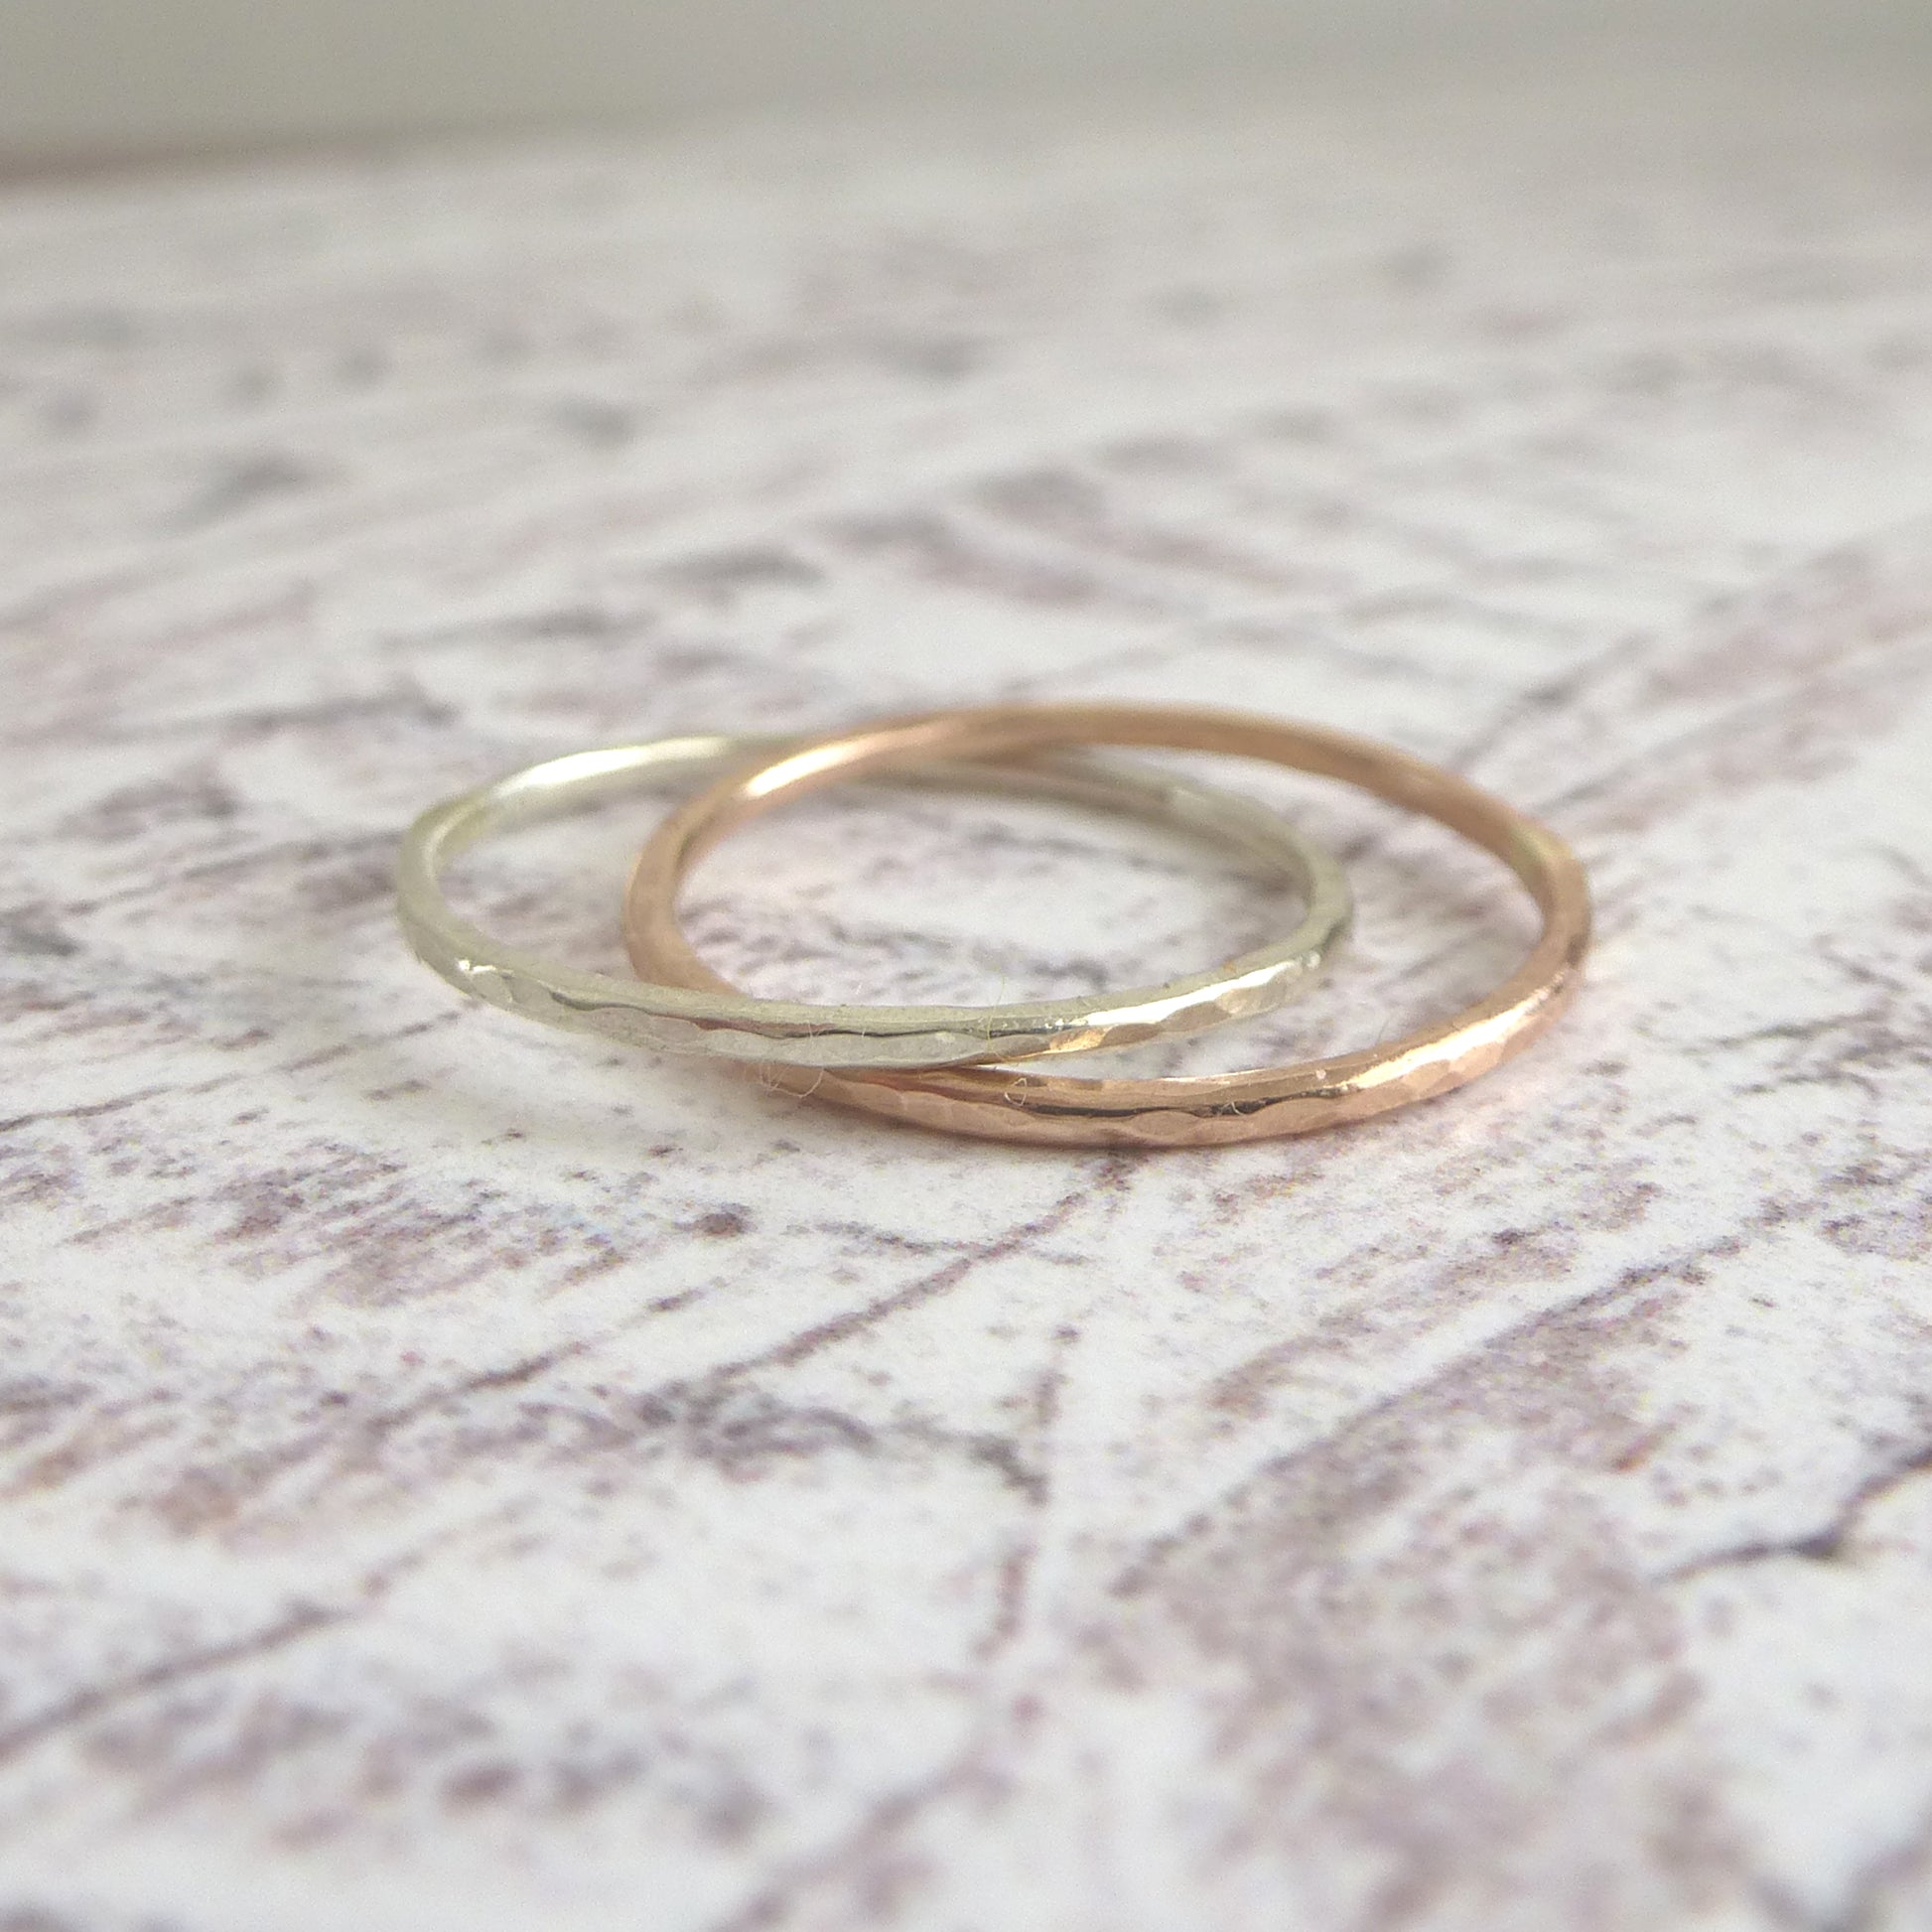 A pair of joined or russian wedding ring style bands in 9ct white and rose gold, with a hammered finish